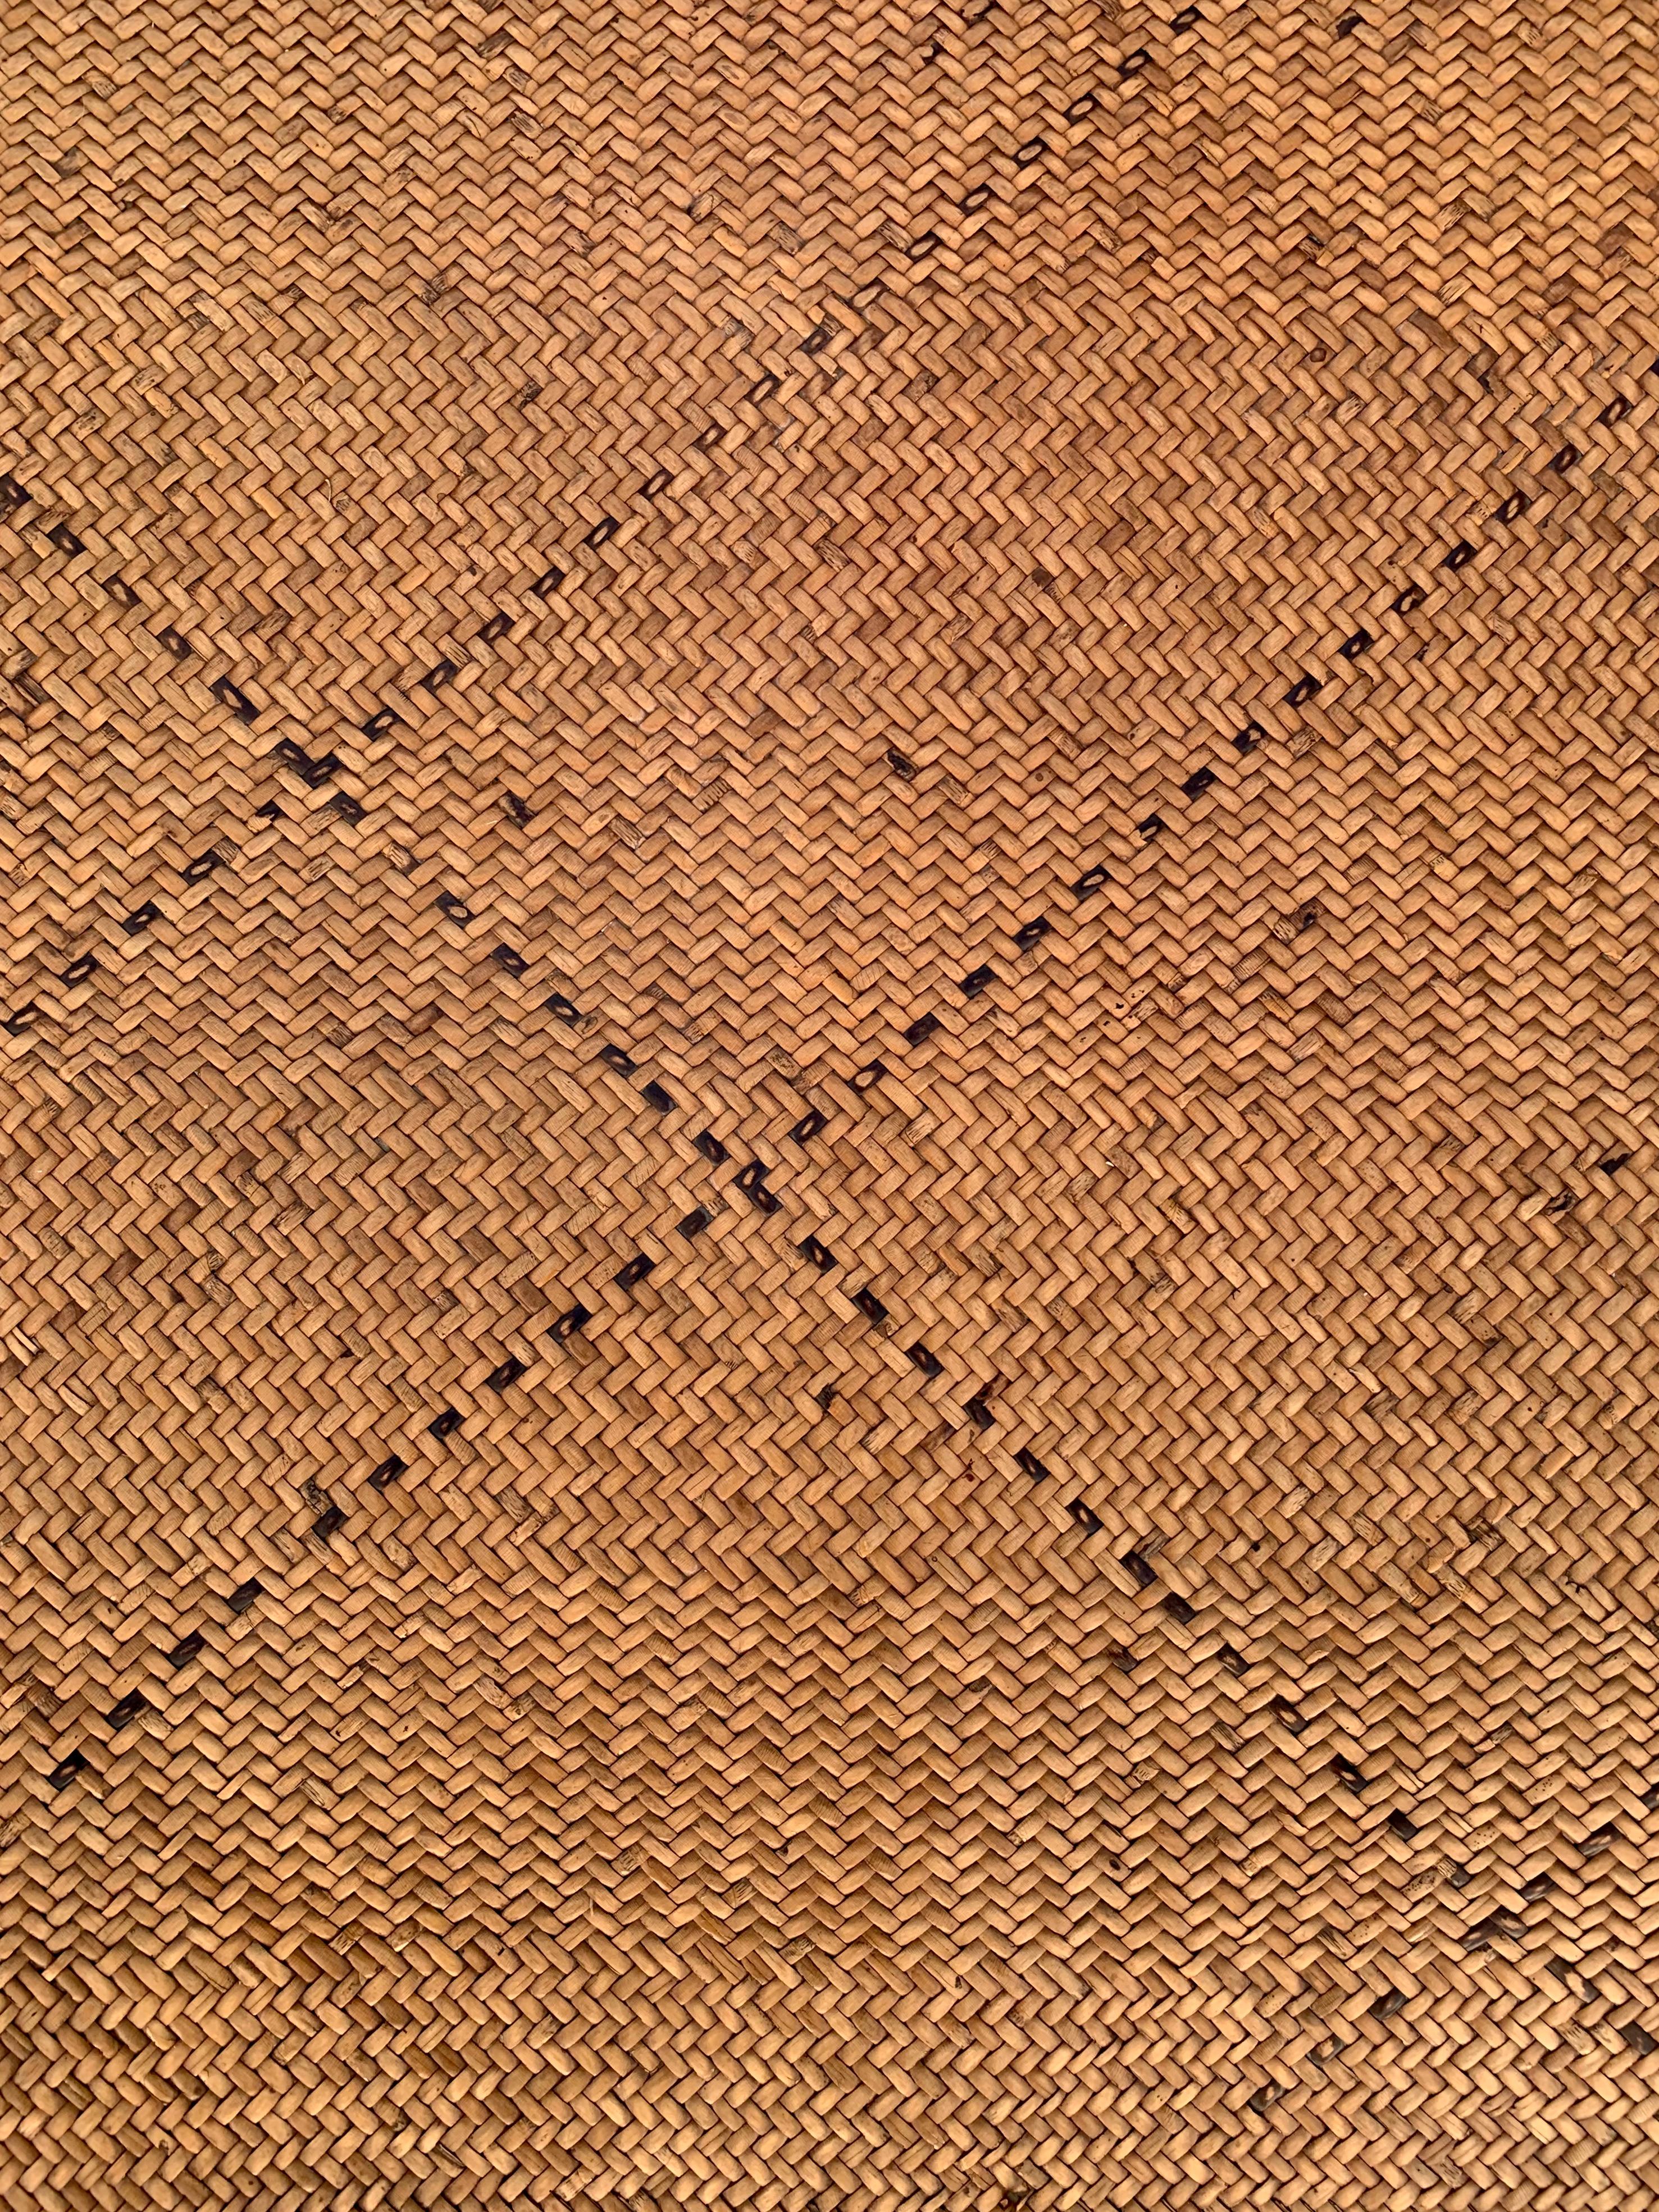 This floor mat once occupied a tribal long house of the Dayak Tribe of Borneo. It is made from woven dyed and natural coloured rattan fibres & features a subtle hint of diagonal black fibres. 

Dimension: Height 250cm x Width 160cm.
 